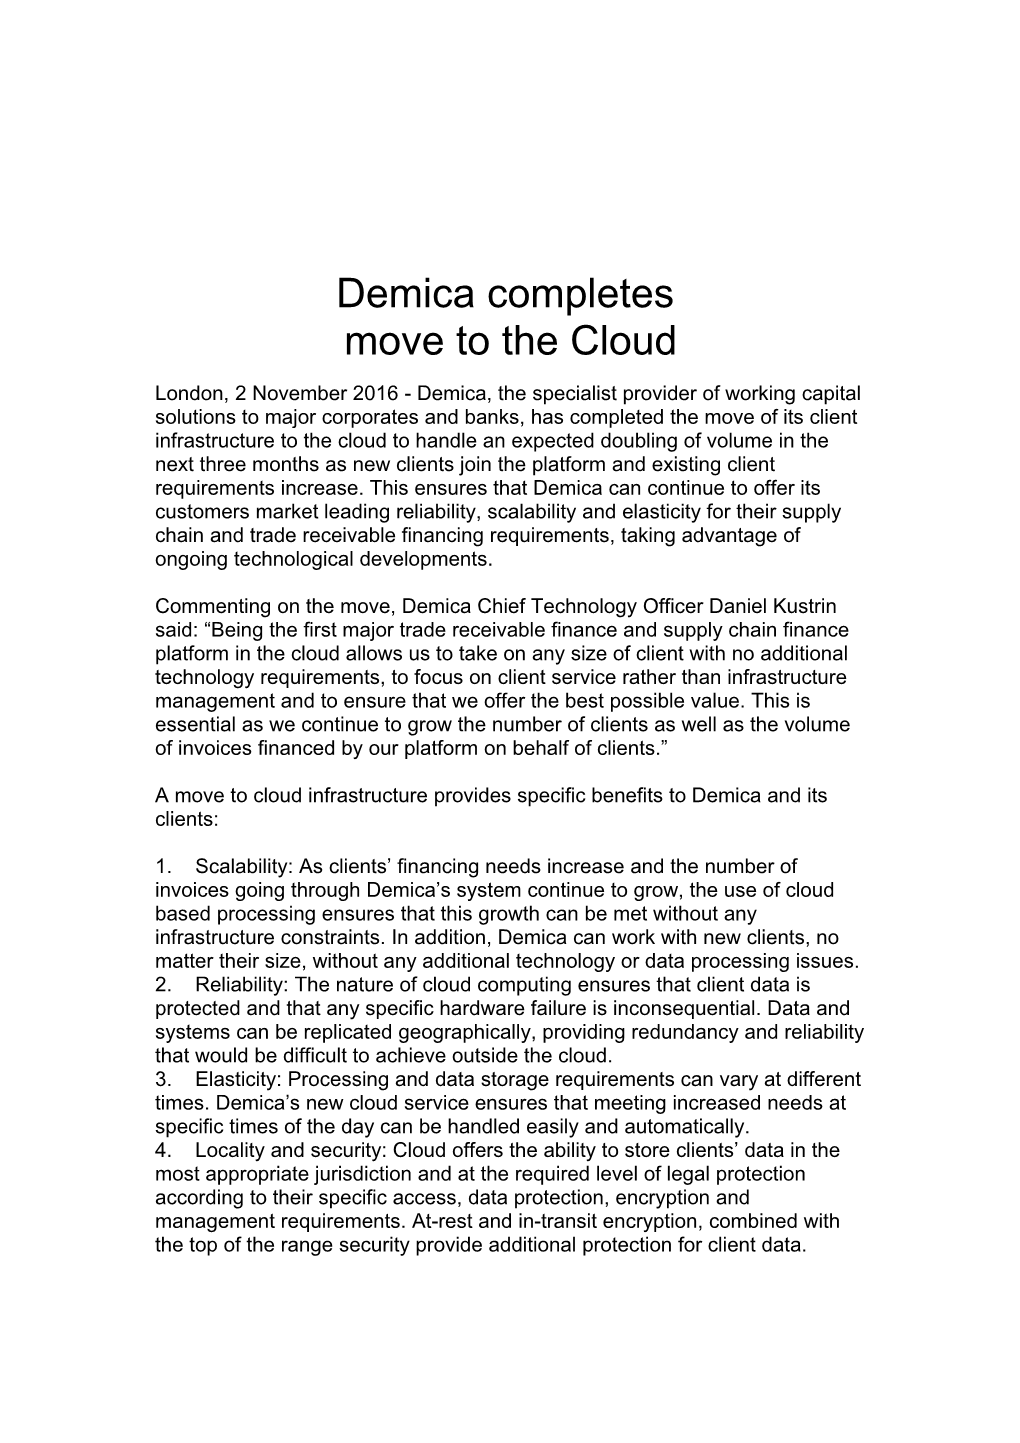 Demica Completes Move to the Cloud